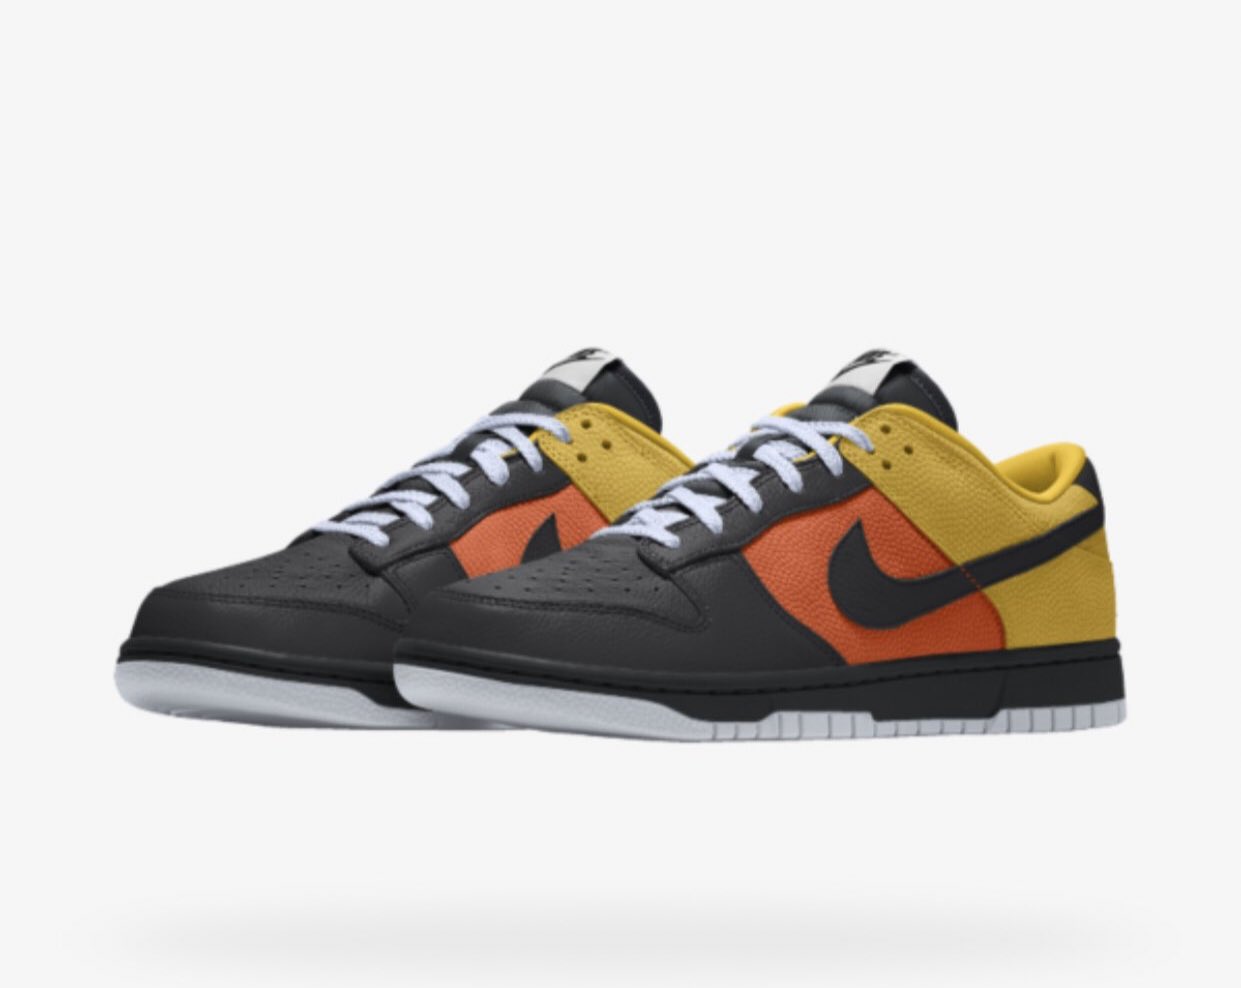 Nice Kicks The Nike Dunk Low 365 By You Are Ready To Customize Show Us Your Designs Before They Drop